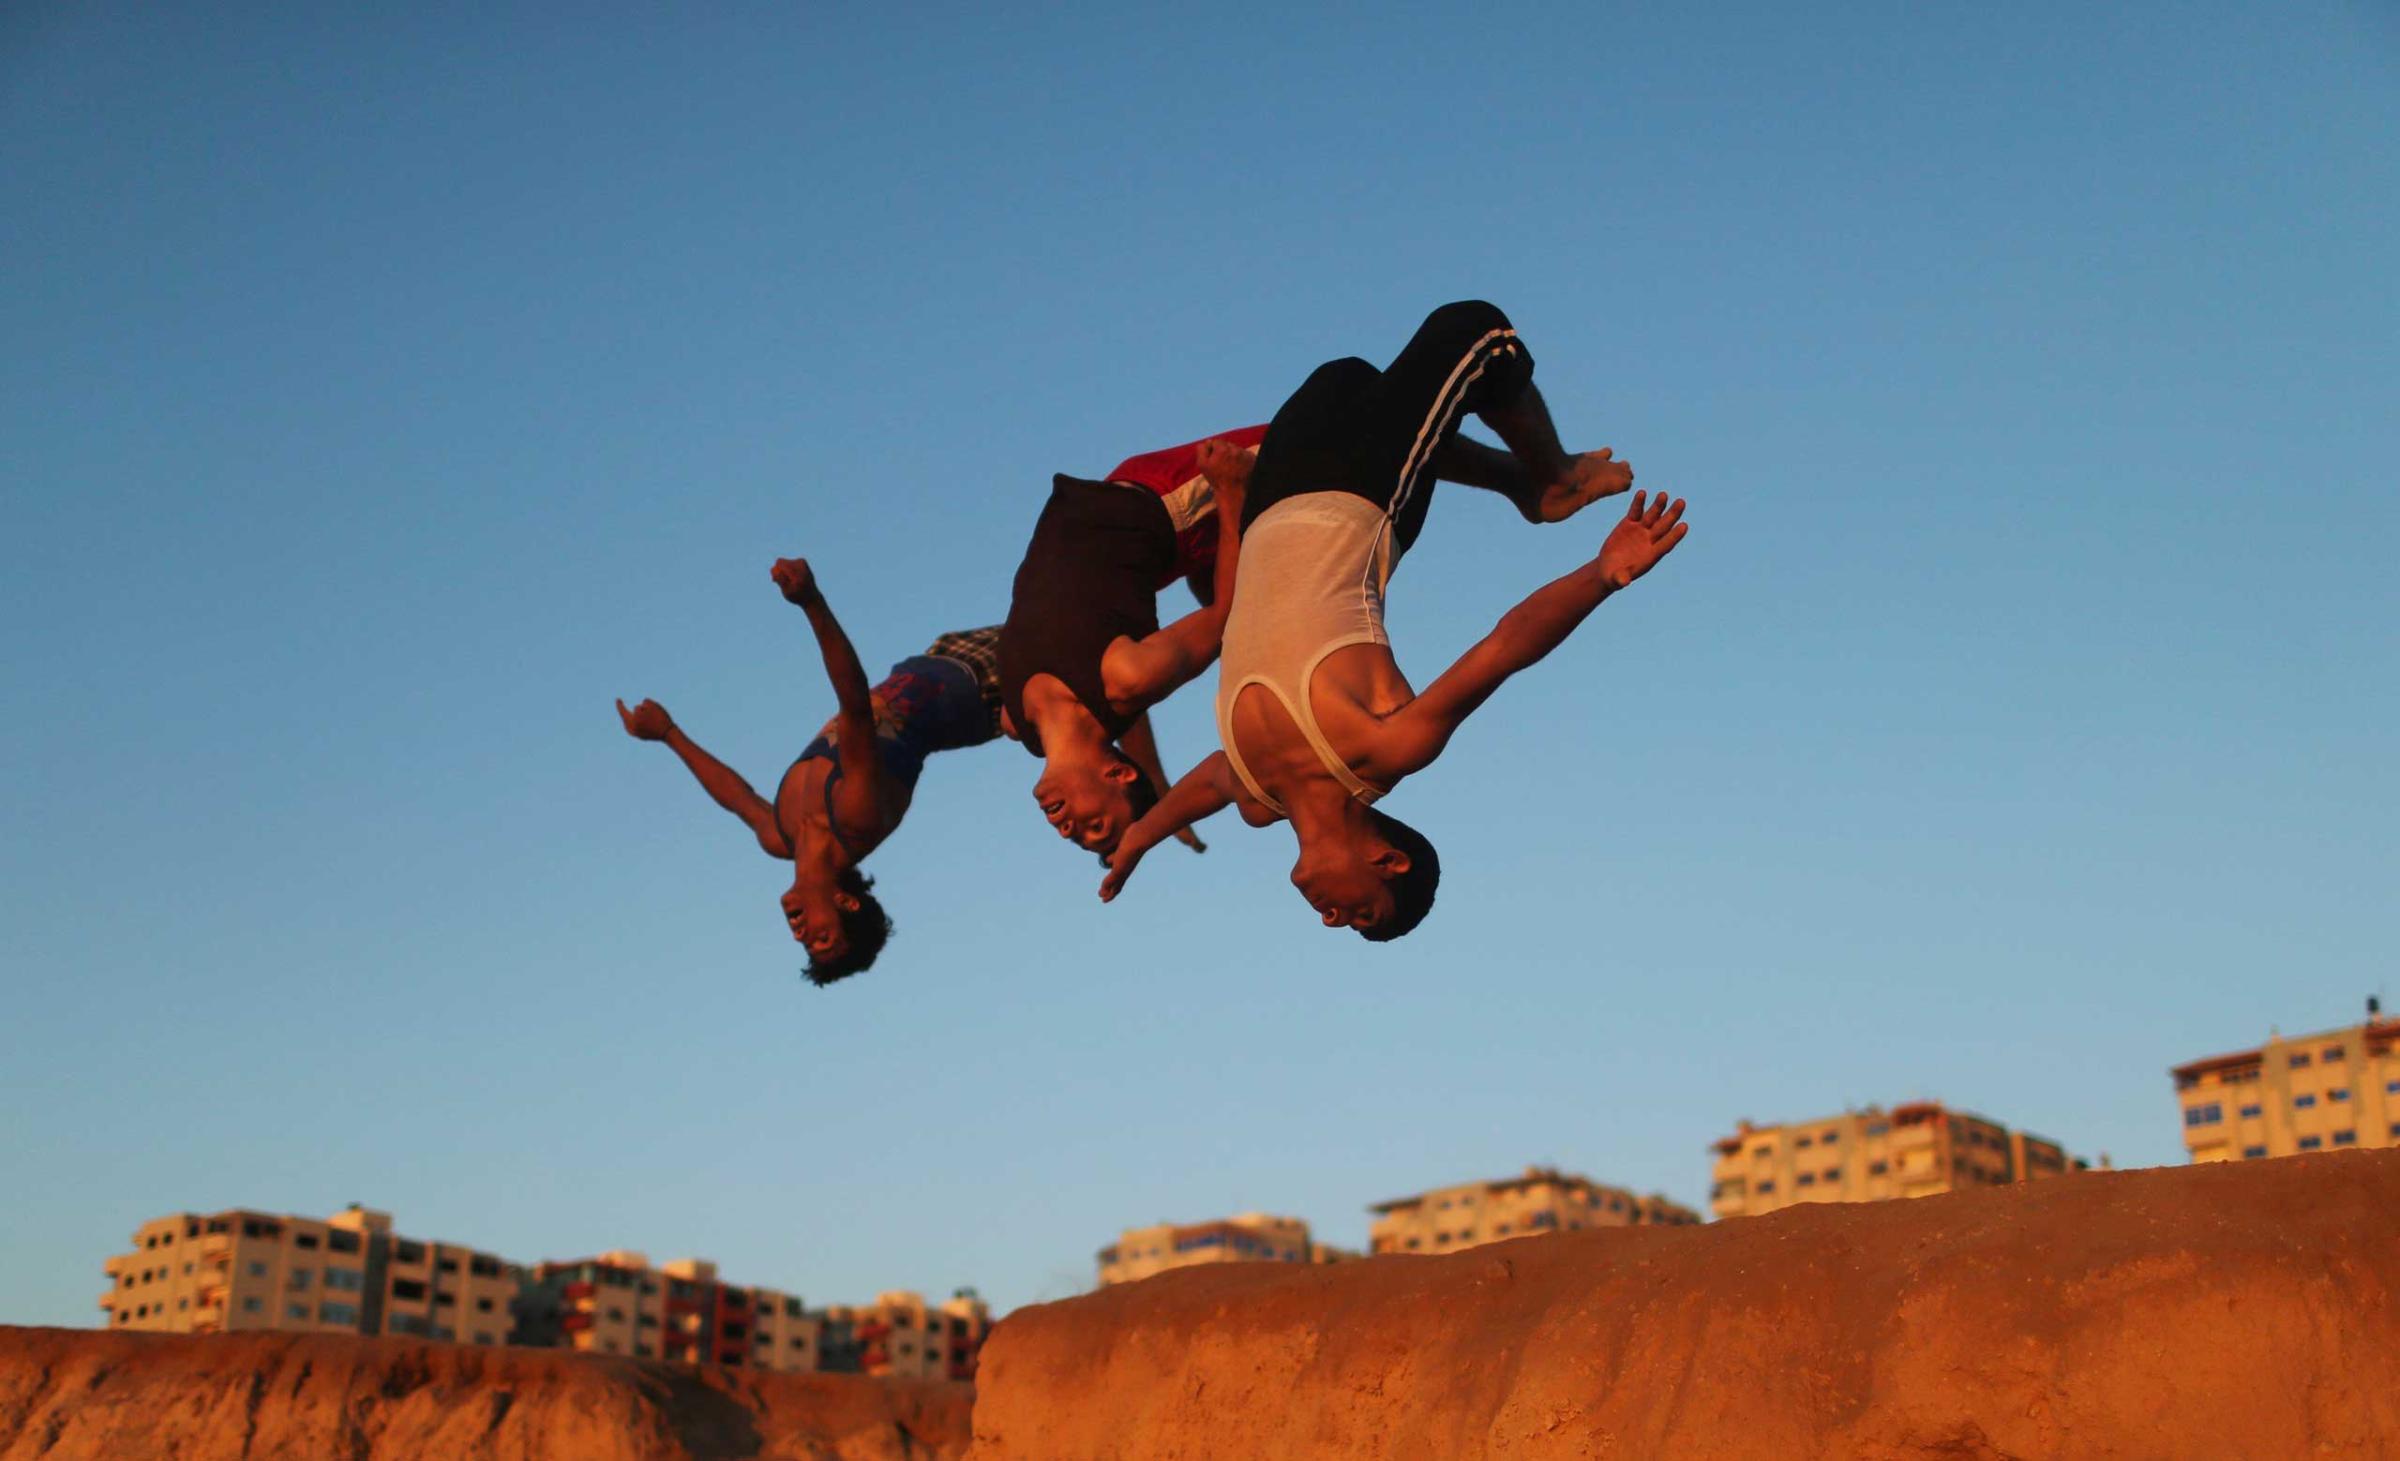 Palestinian youths practice their parkour skills at the Shati refugee camp in Gaza City